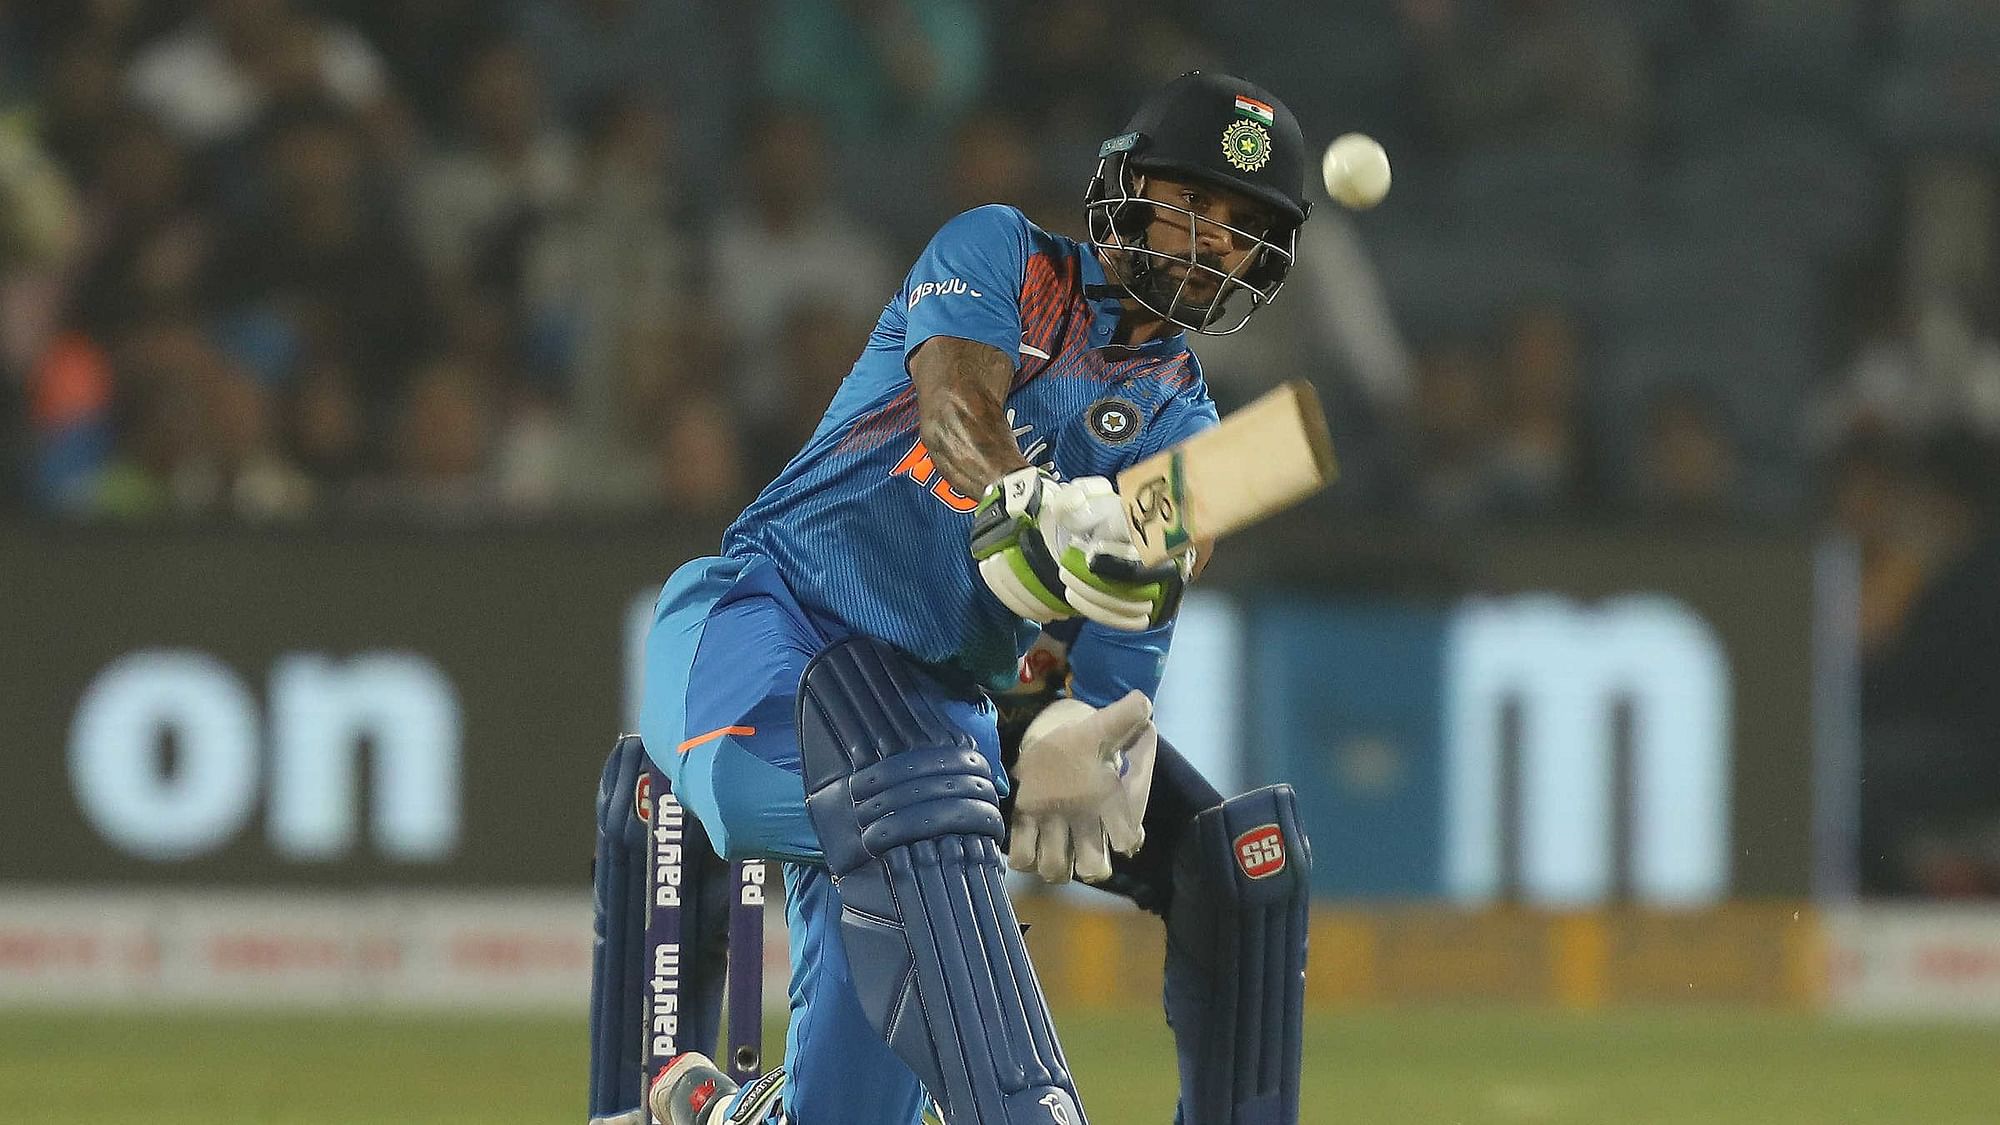 Shikhar Dhawan’s 36-ball 52 against Sri Lanka in the third T20I was laced with seven boundaries and a six.